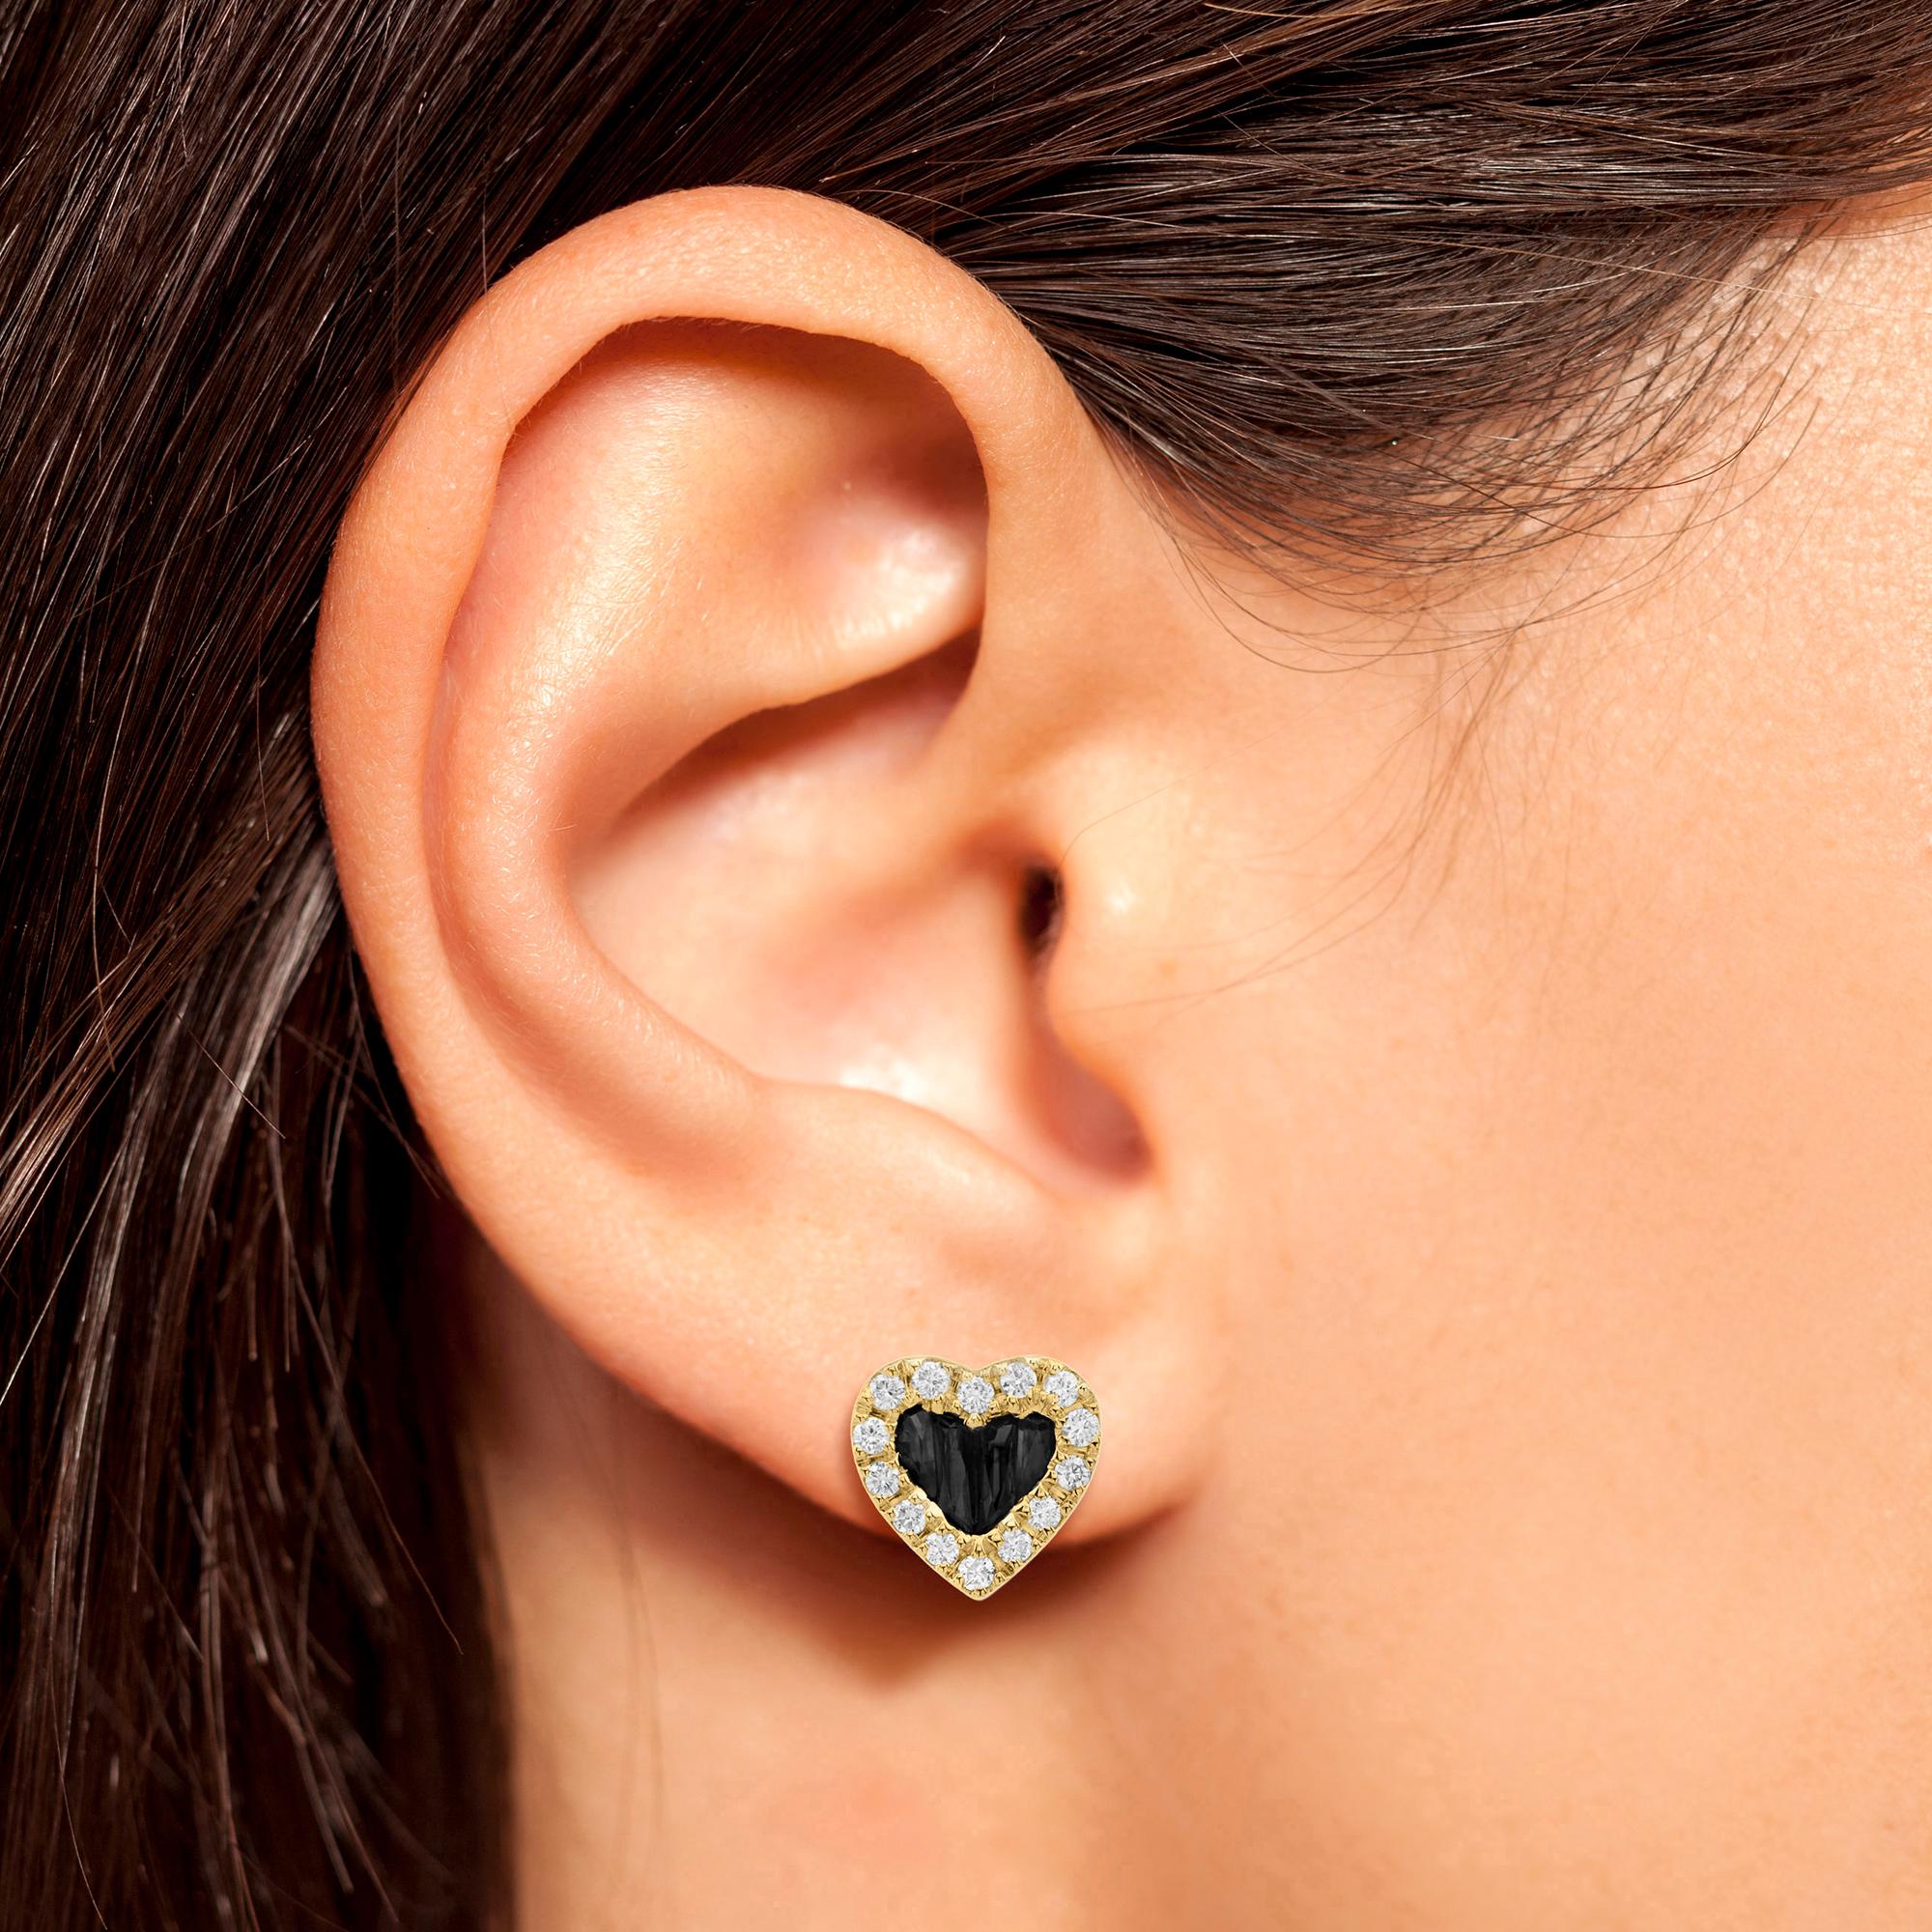 Carry eternity love with you always when you wear these luminous heart shape onyx and diamond earrings. These simple yet meaningful heart earrings are an ideal gift for the one you love.

Information
Metal: 14K Yellow Gold
Width: 10 mm.
Length: 10